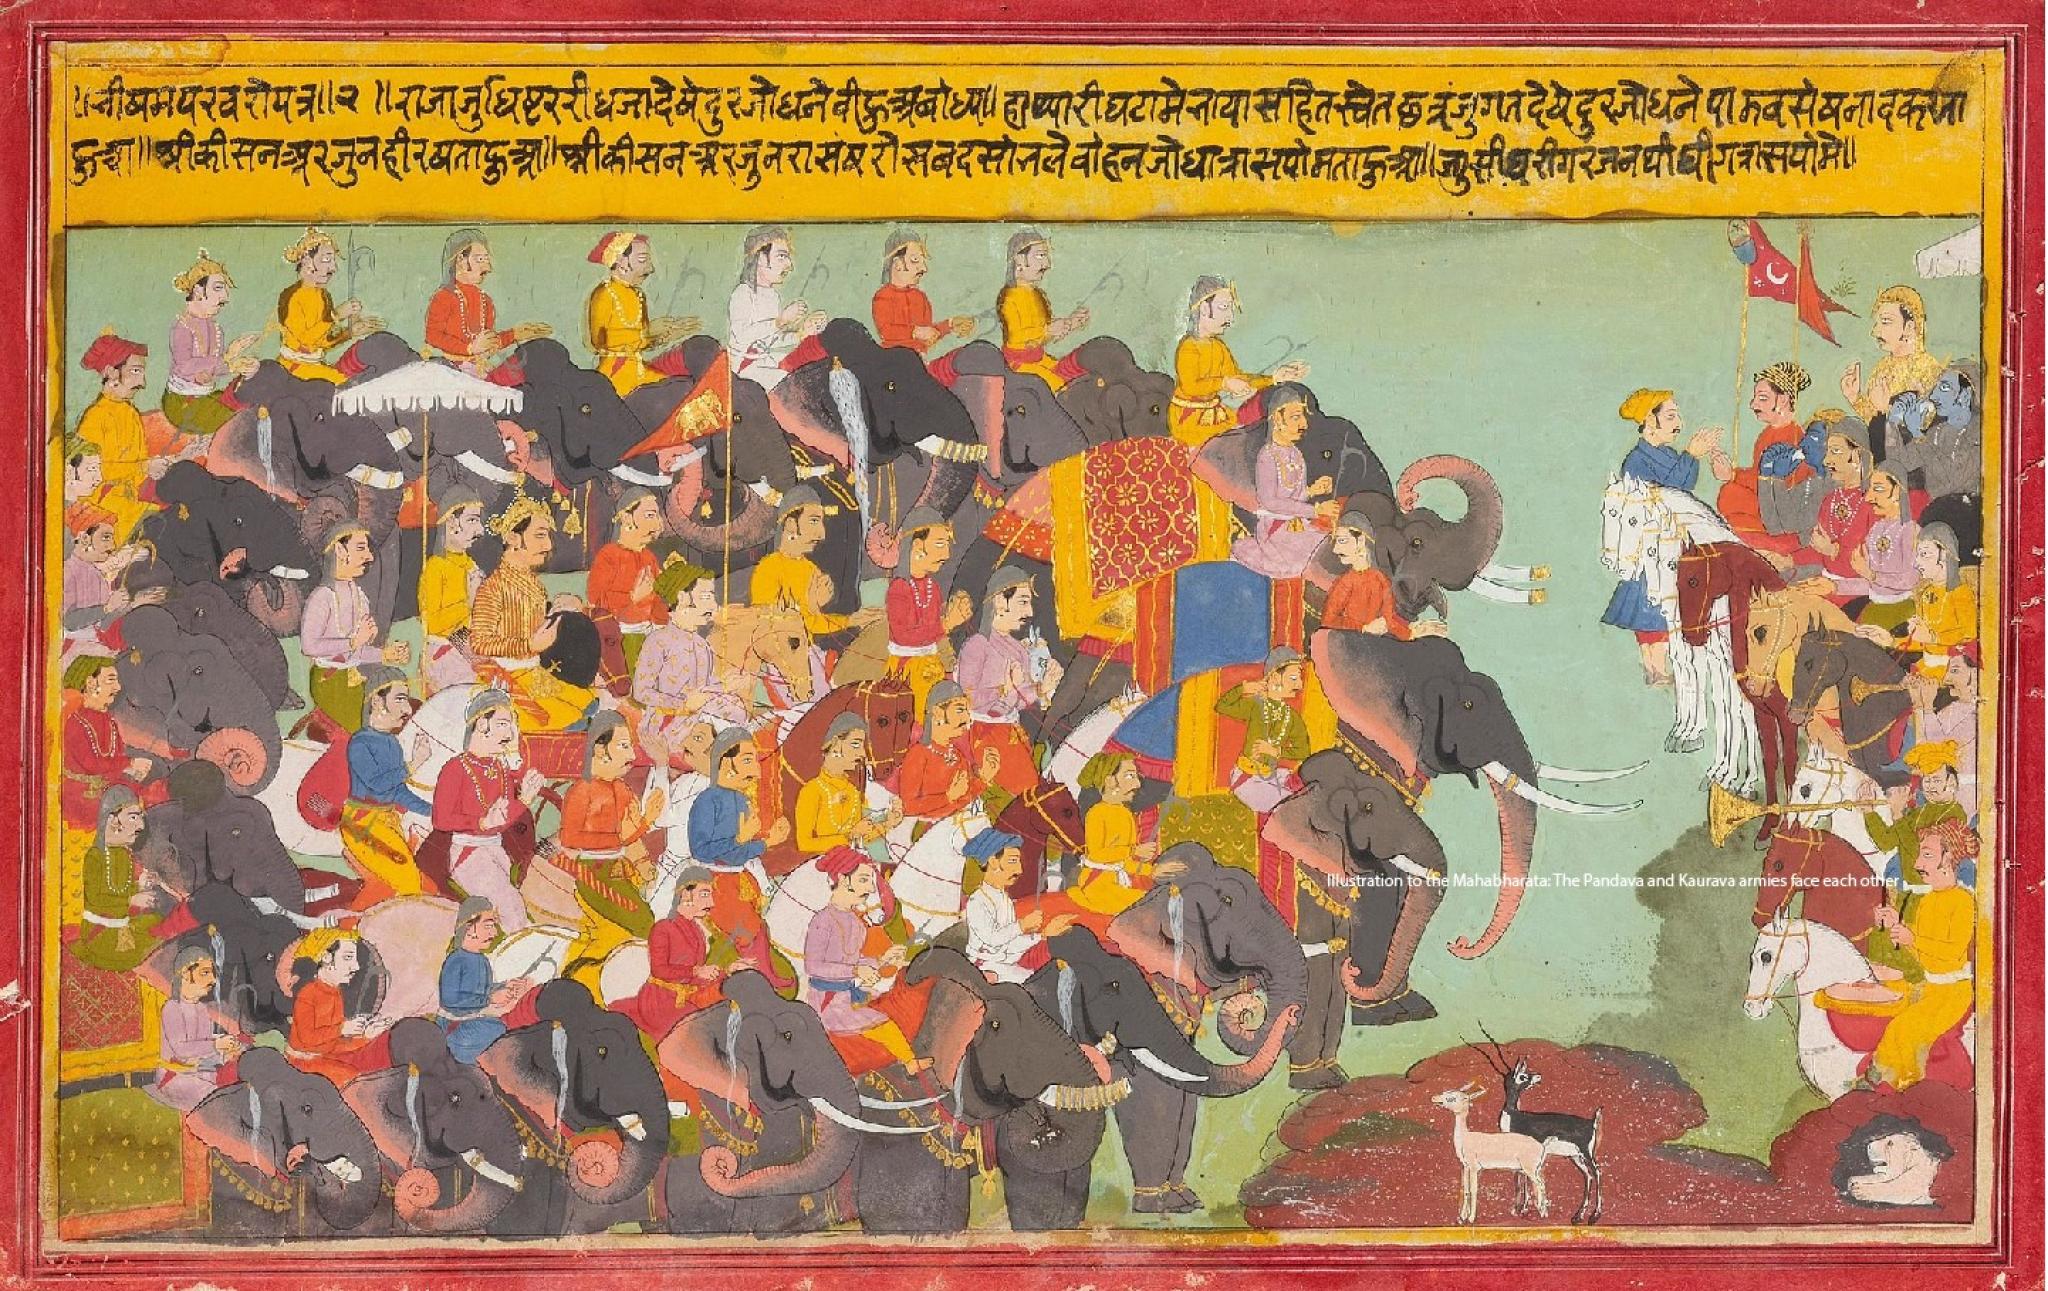 The Pandava and Kaurava armies face each other